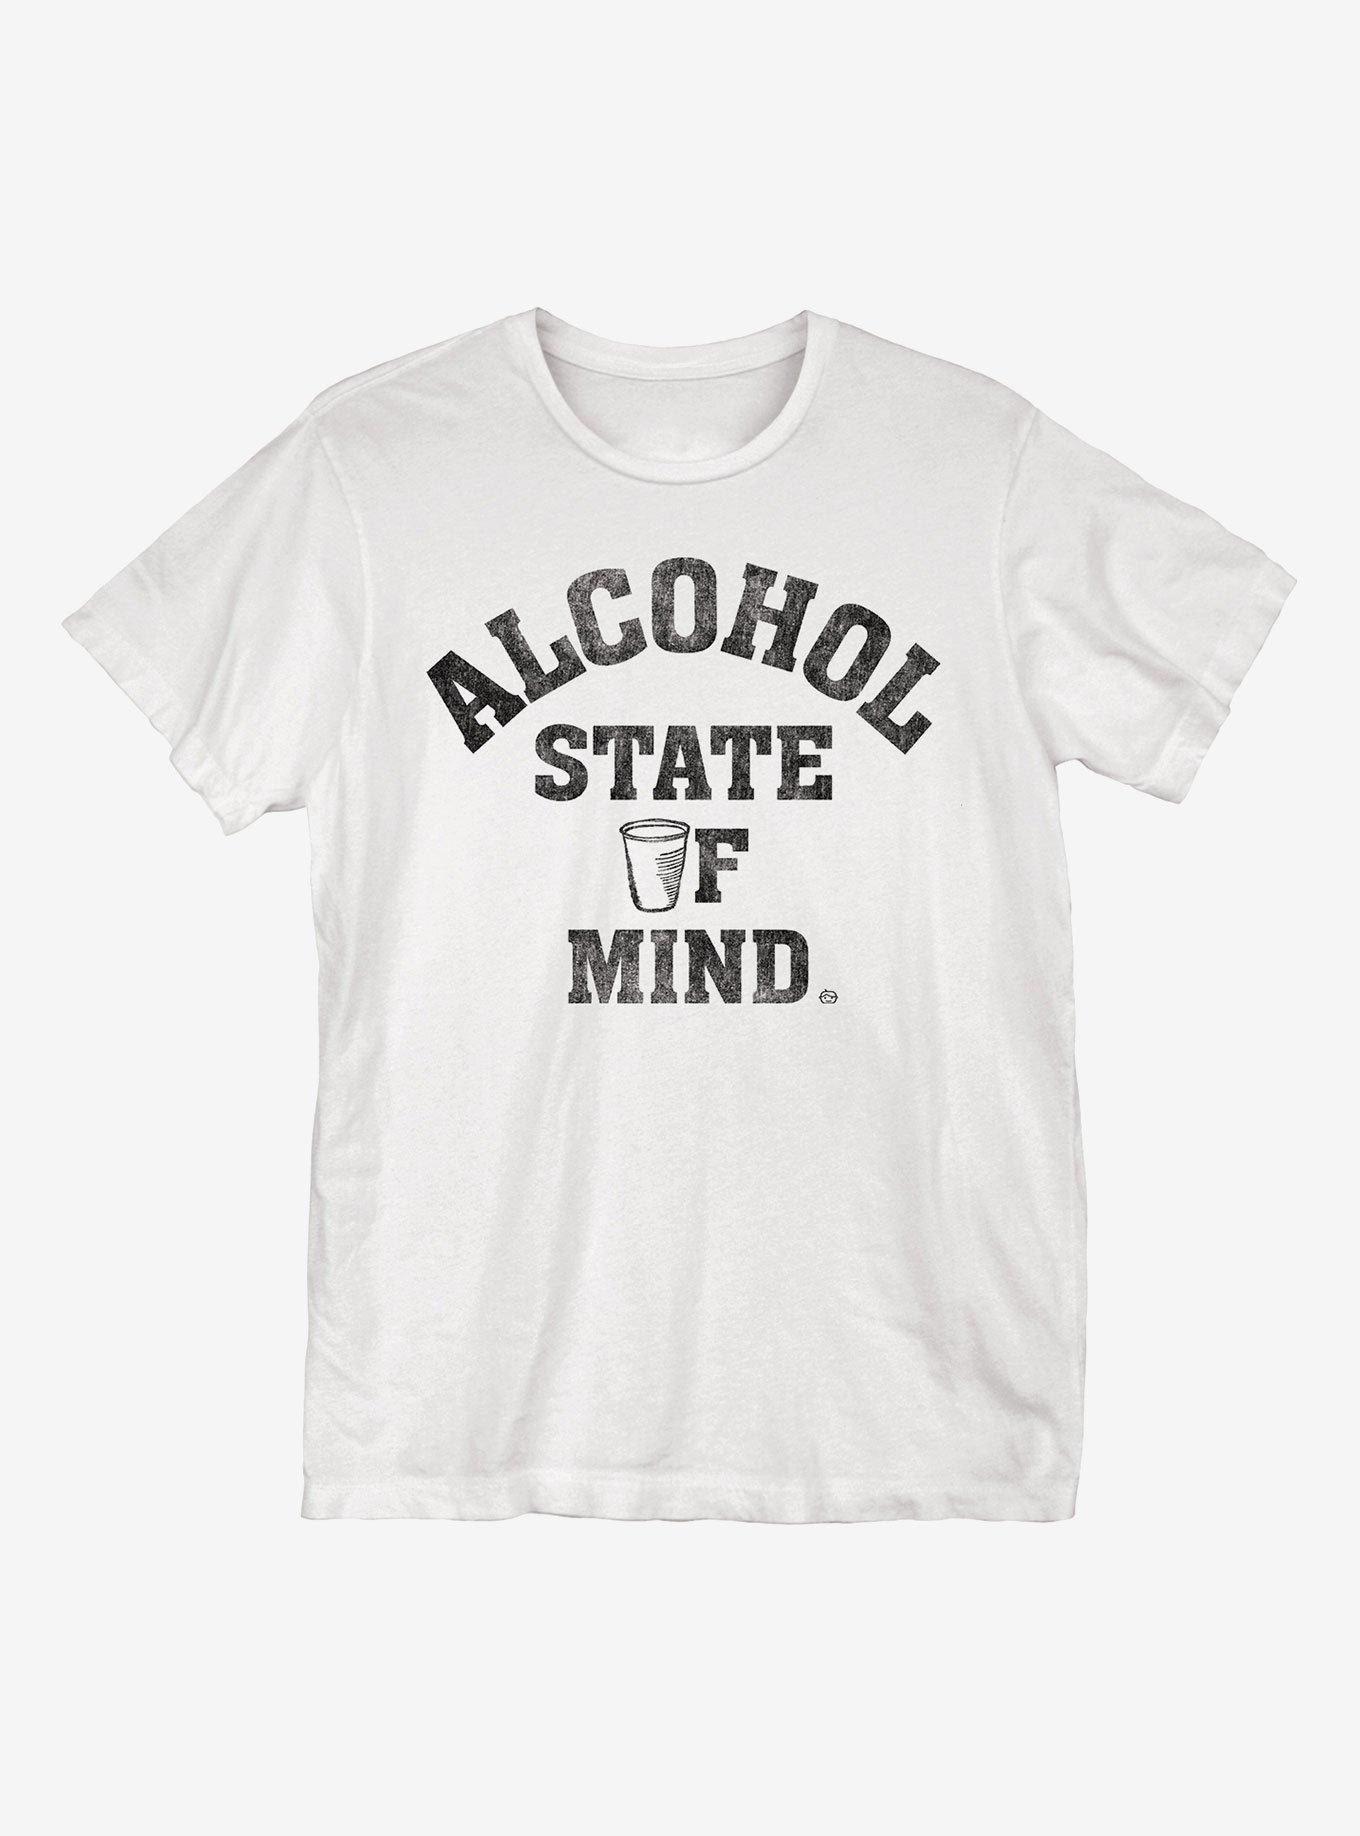 Alcohol State of Mind T-Shirt, WHITE, hi-res